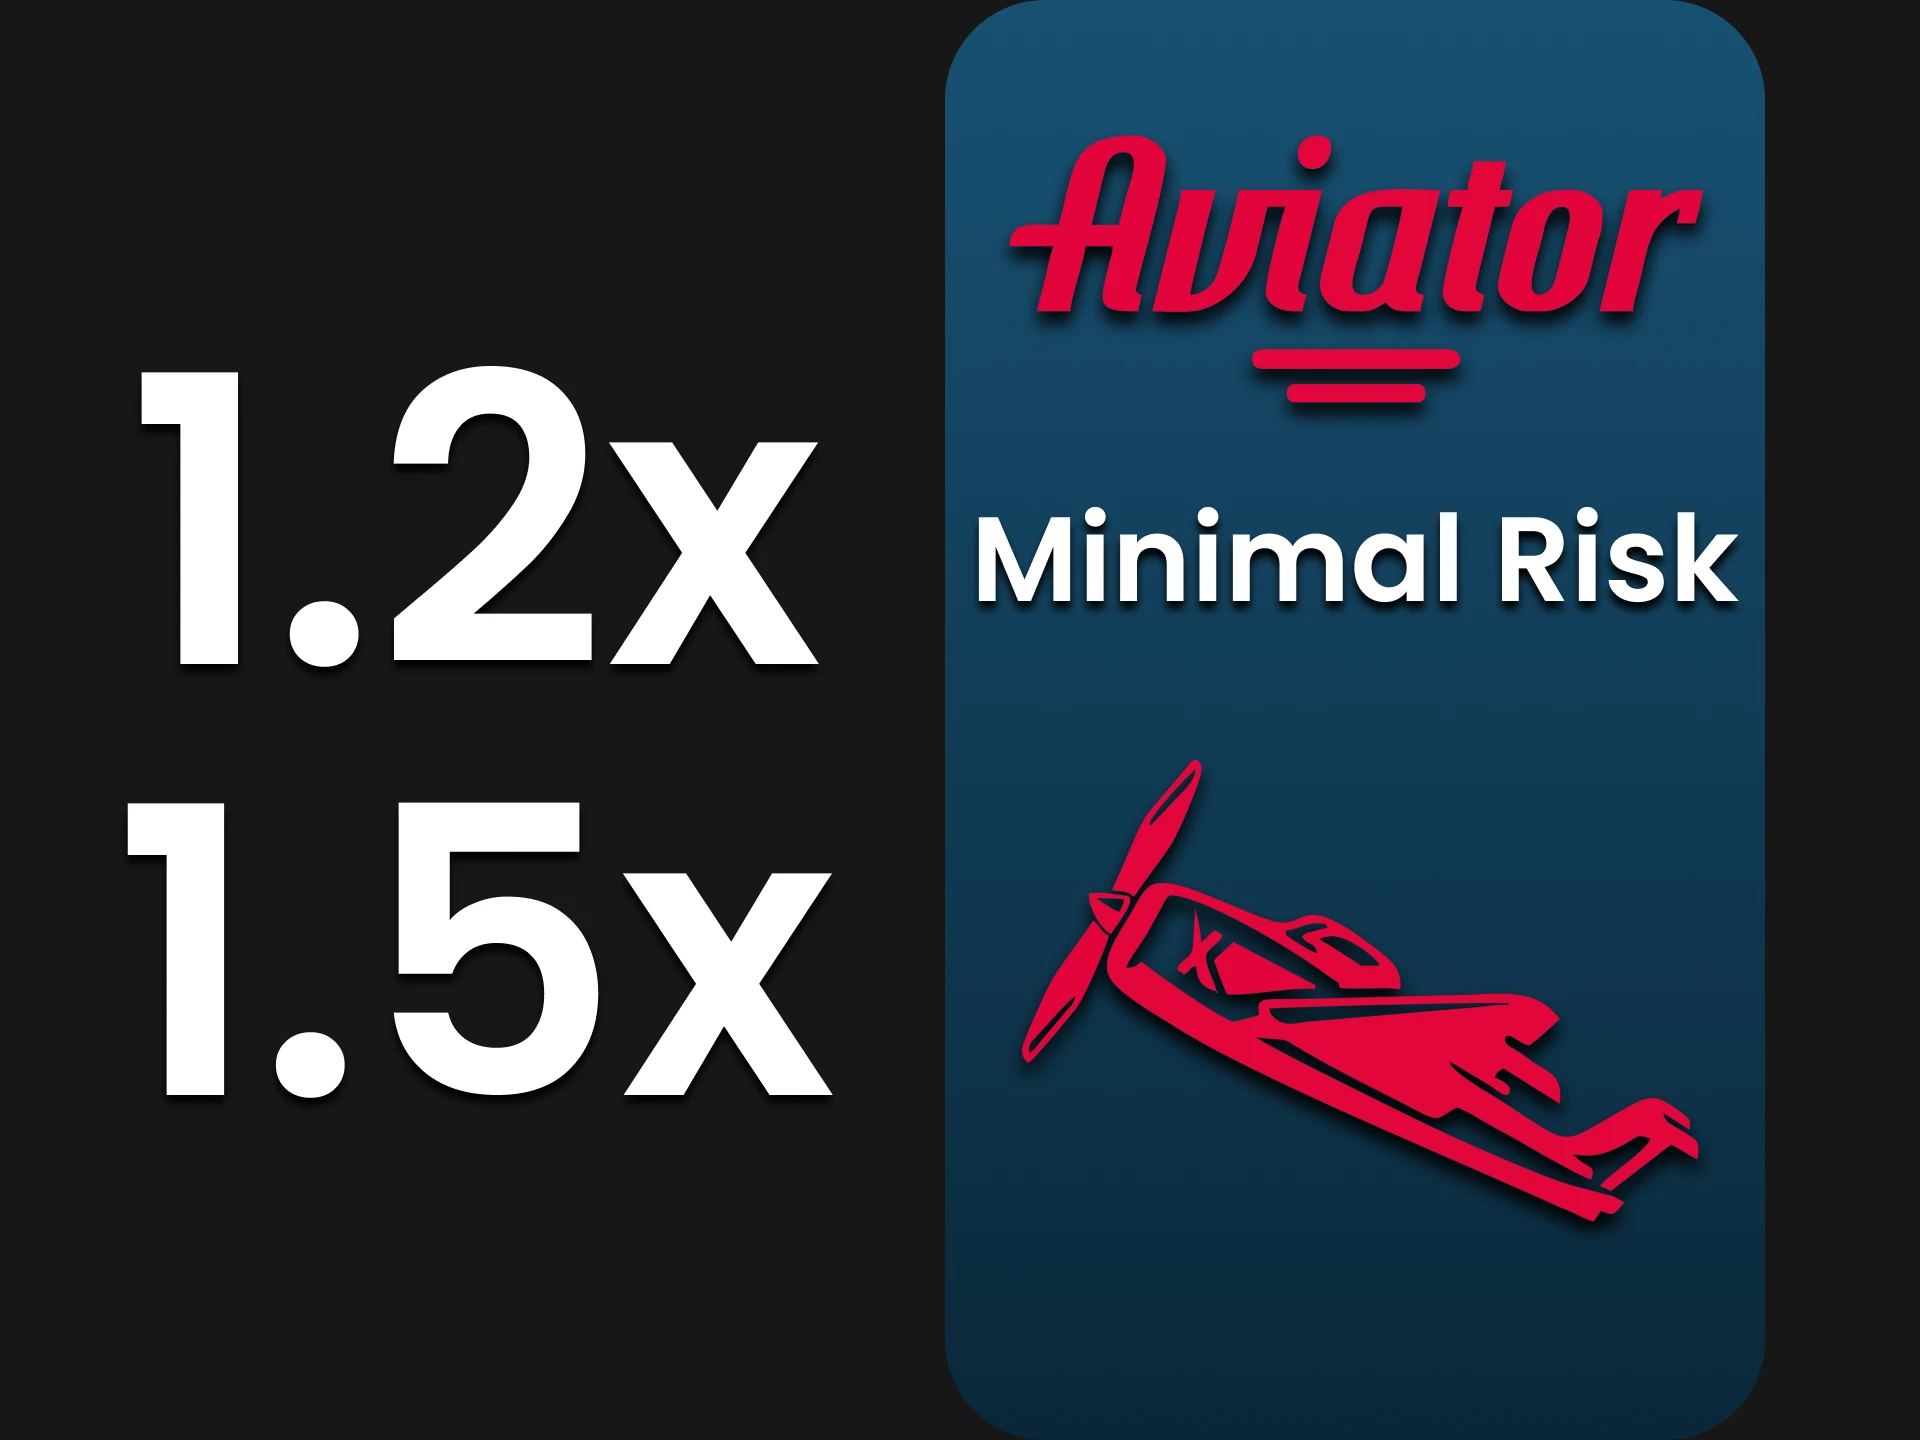 You can use Minimal Risk tactics to win in Aviator.